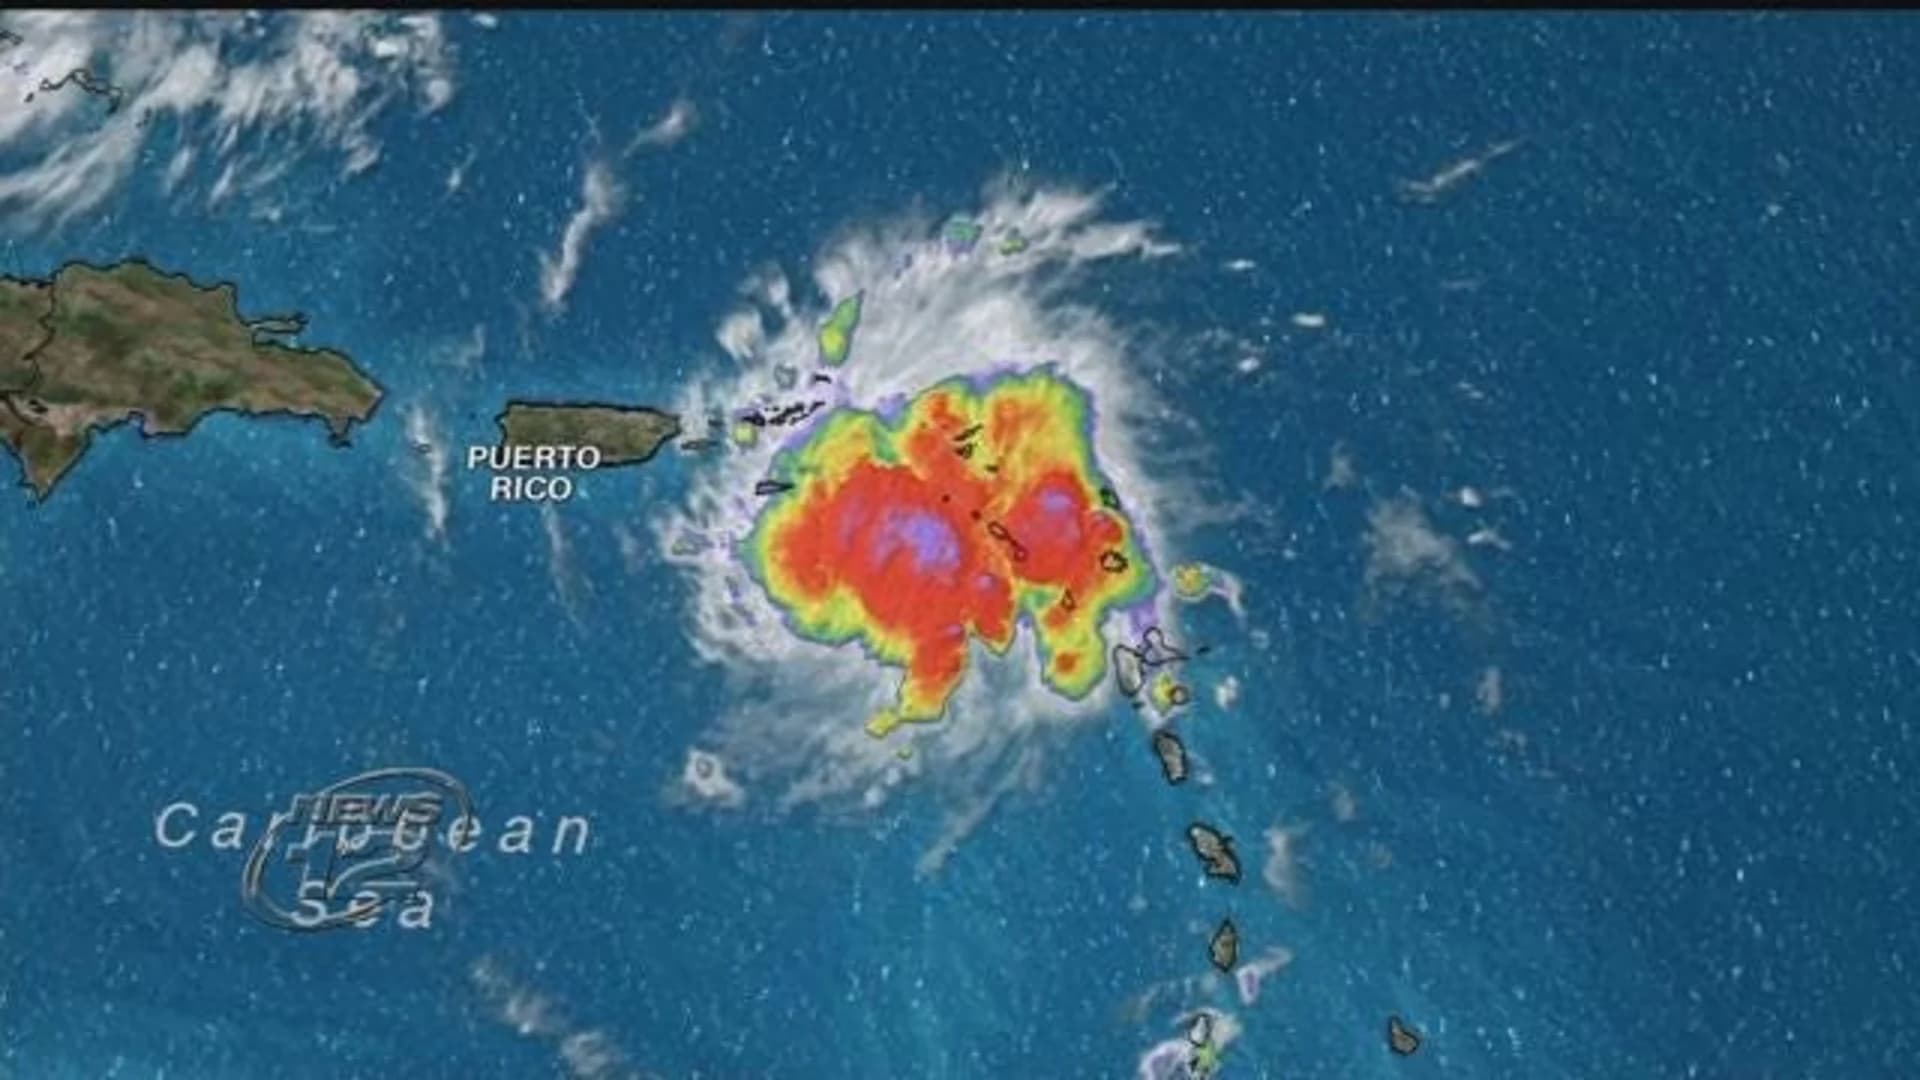 Dorian aims for US, causes limited damage in Caribbean